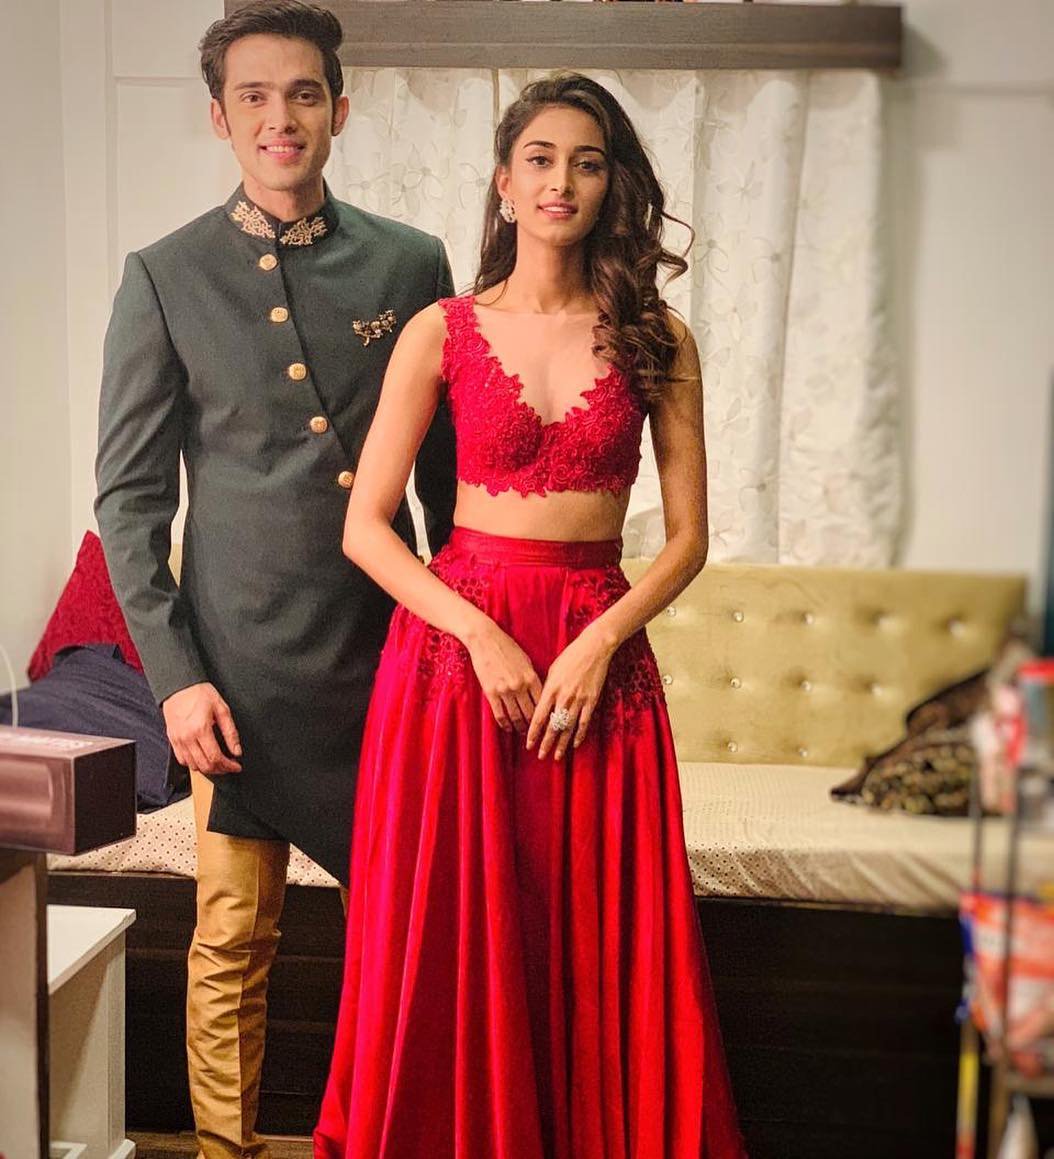 Kasautii Zindagii Kay's Parth Samthaan-Erica Fernadnes in 'Nach Baliye 9' as participants? Here's the TRUTH!